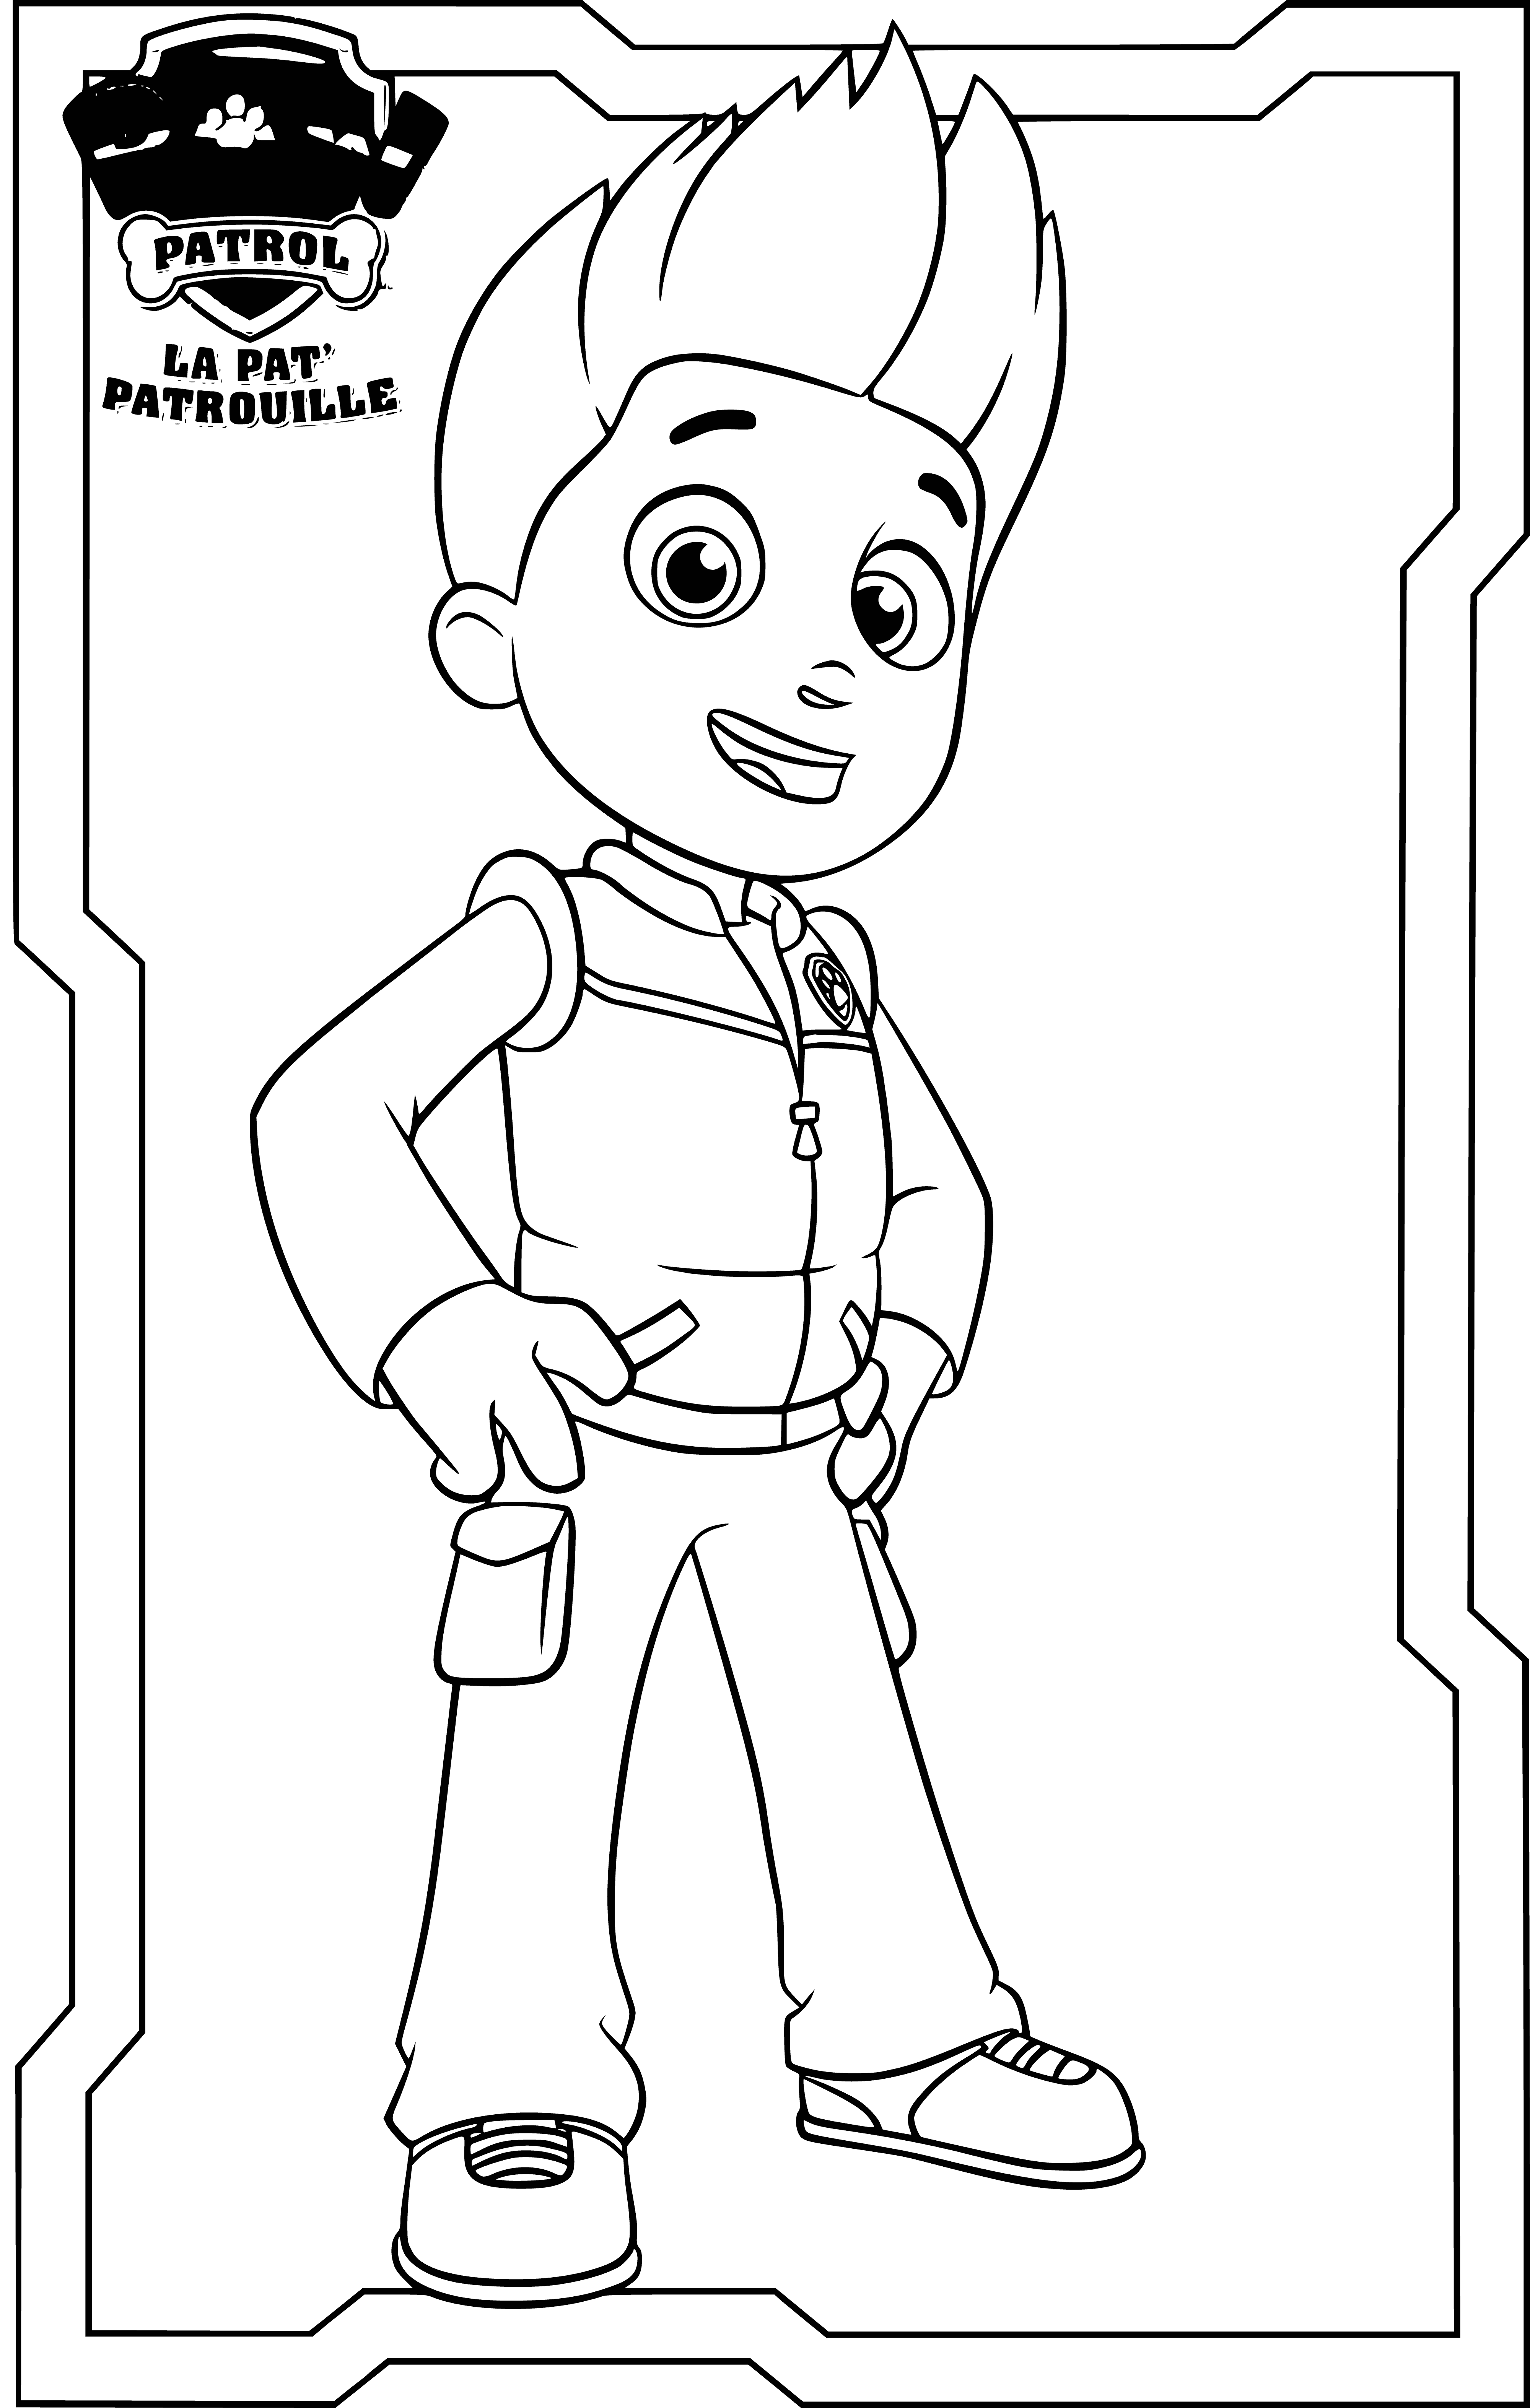 coloring page: Kids learn to ride with PAW Patrol! Plastic Rider toy has a handlebar & seat, blue & white PAW Patrol logo. #PAWPATROL